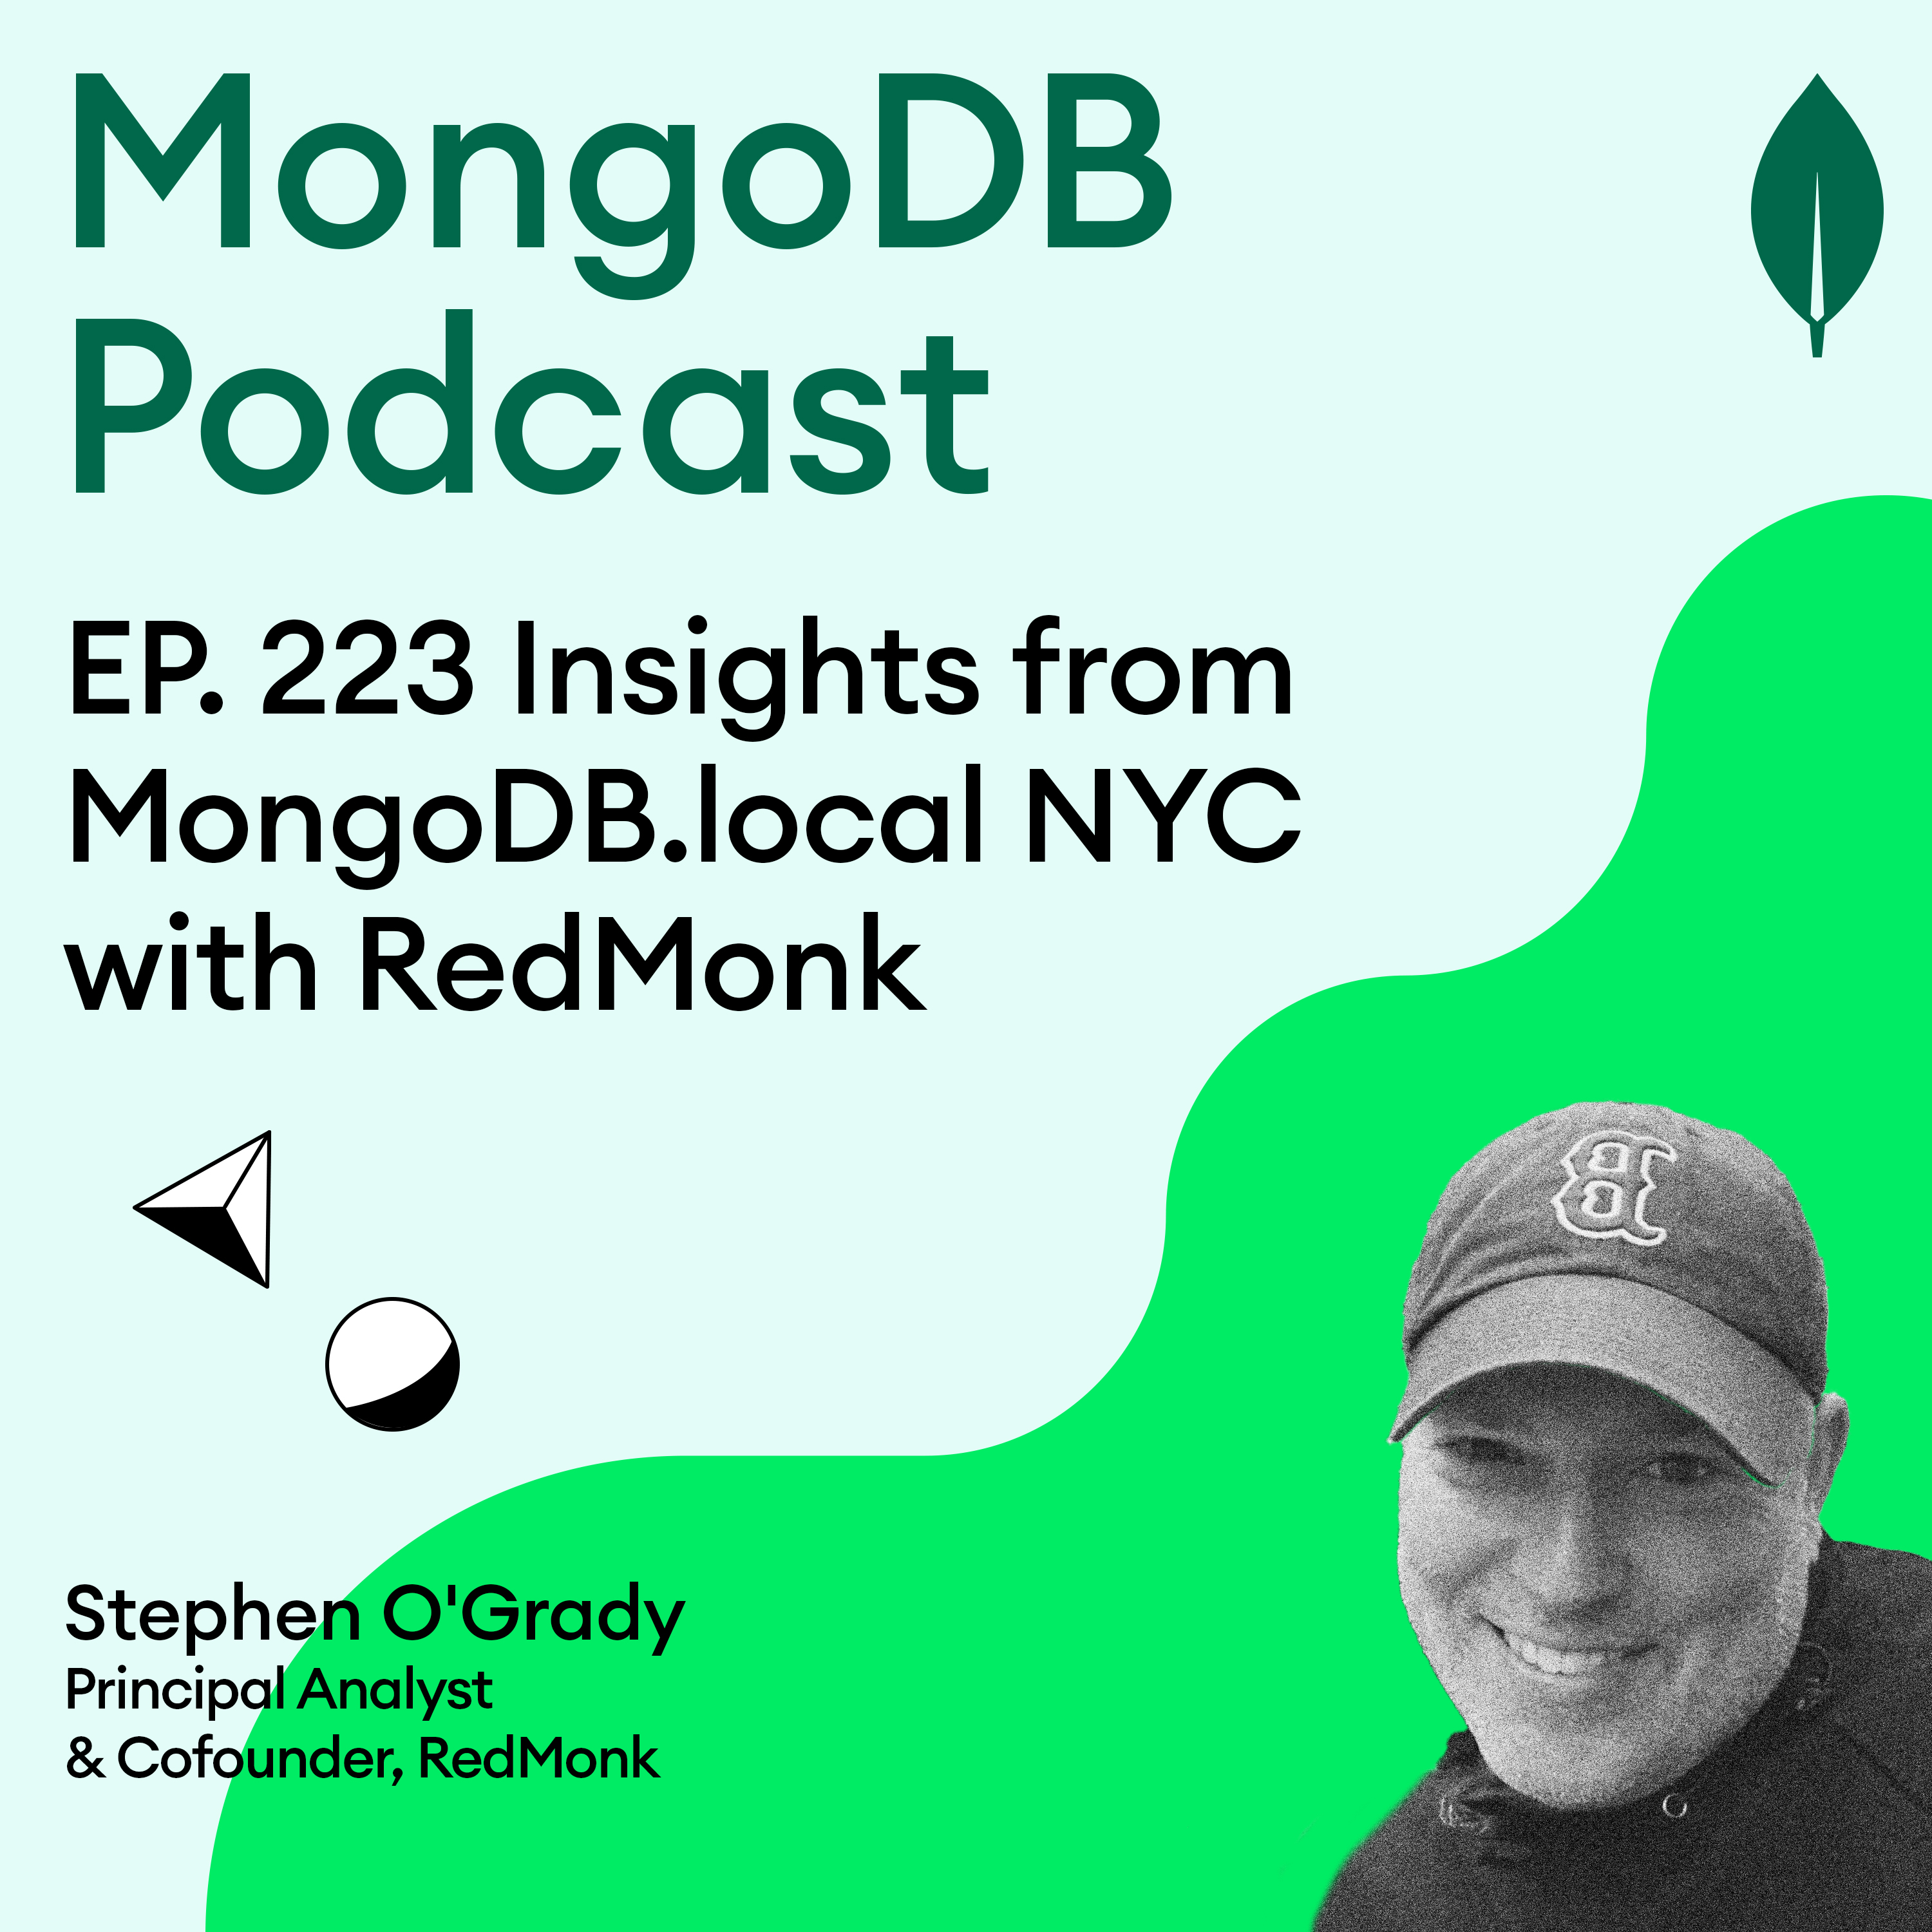 EP. 223 Insights from MongoDB.local NYC with RedMonk